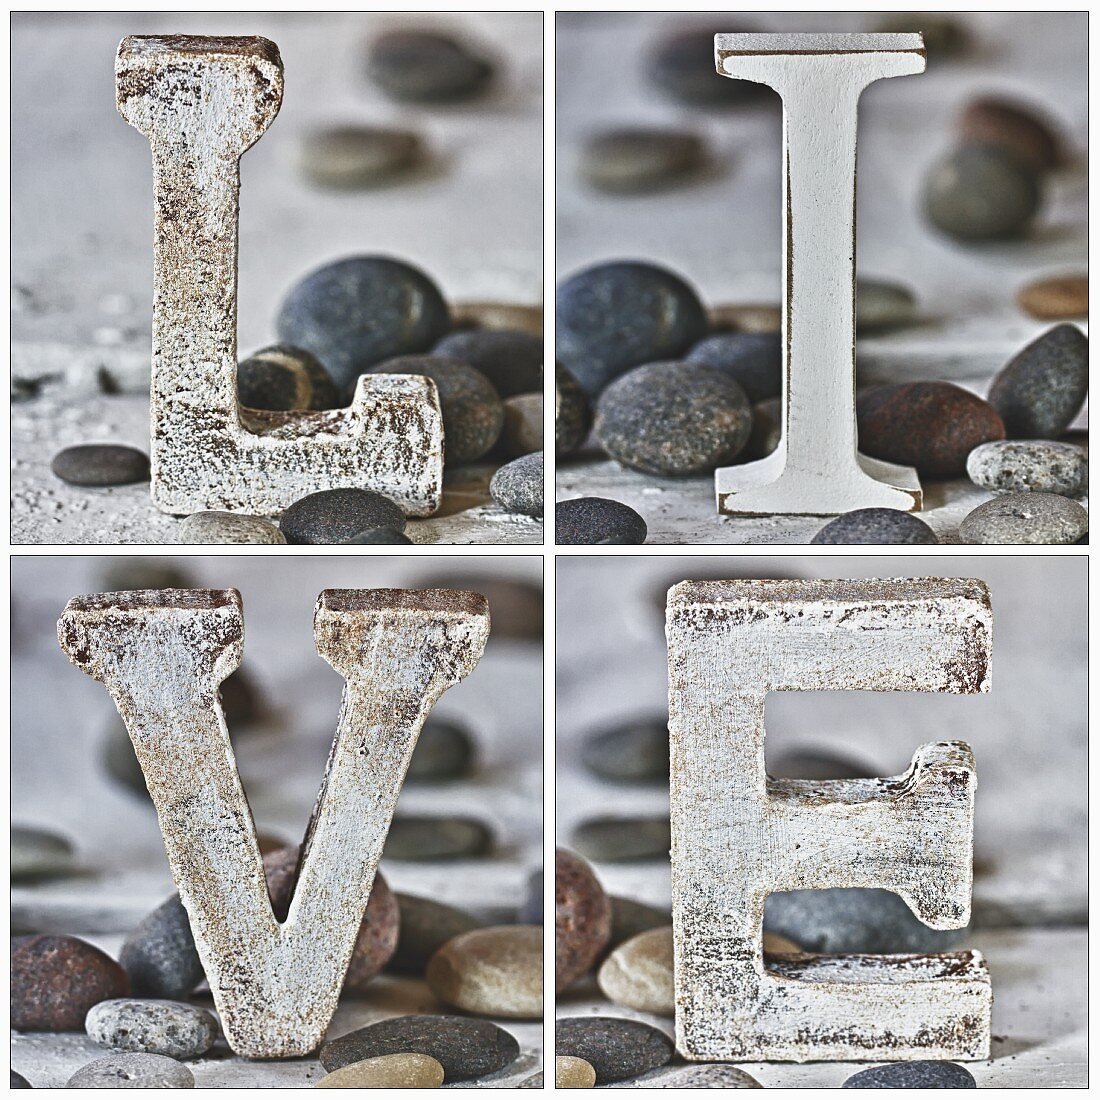 Composition of separate still-life photos of wooden letters and pebbles